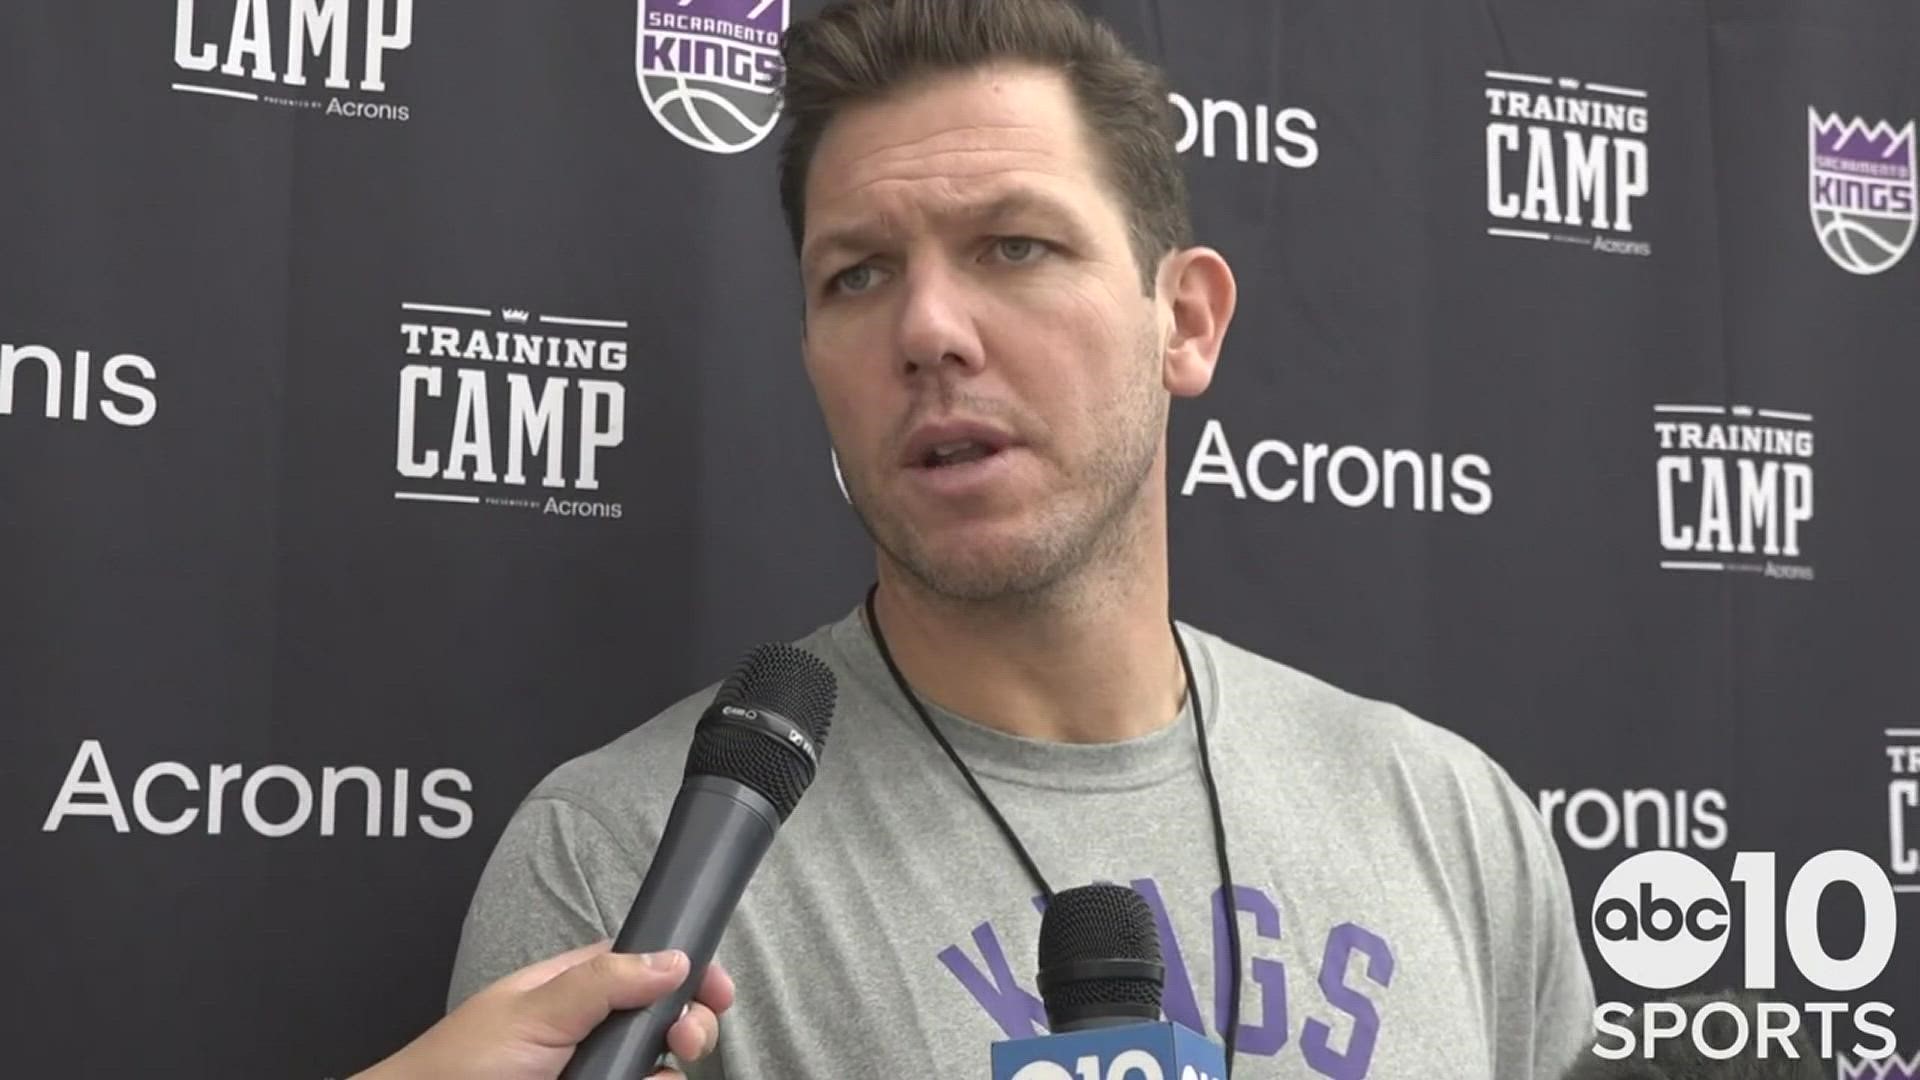 Sacramento Kings head coach Luke Walton talks about the season opener in Portland on Wednesday night and his team being excited to start the 2021-22 campaign.